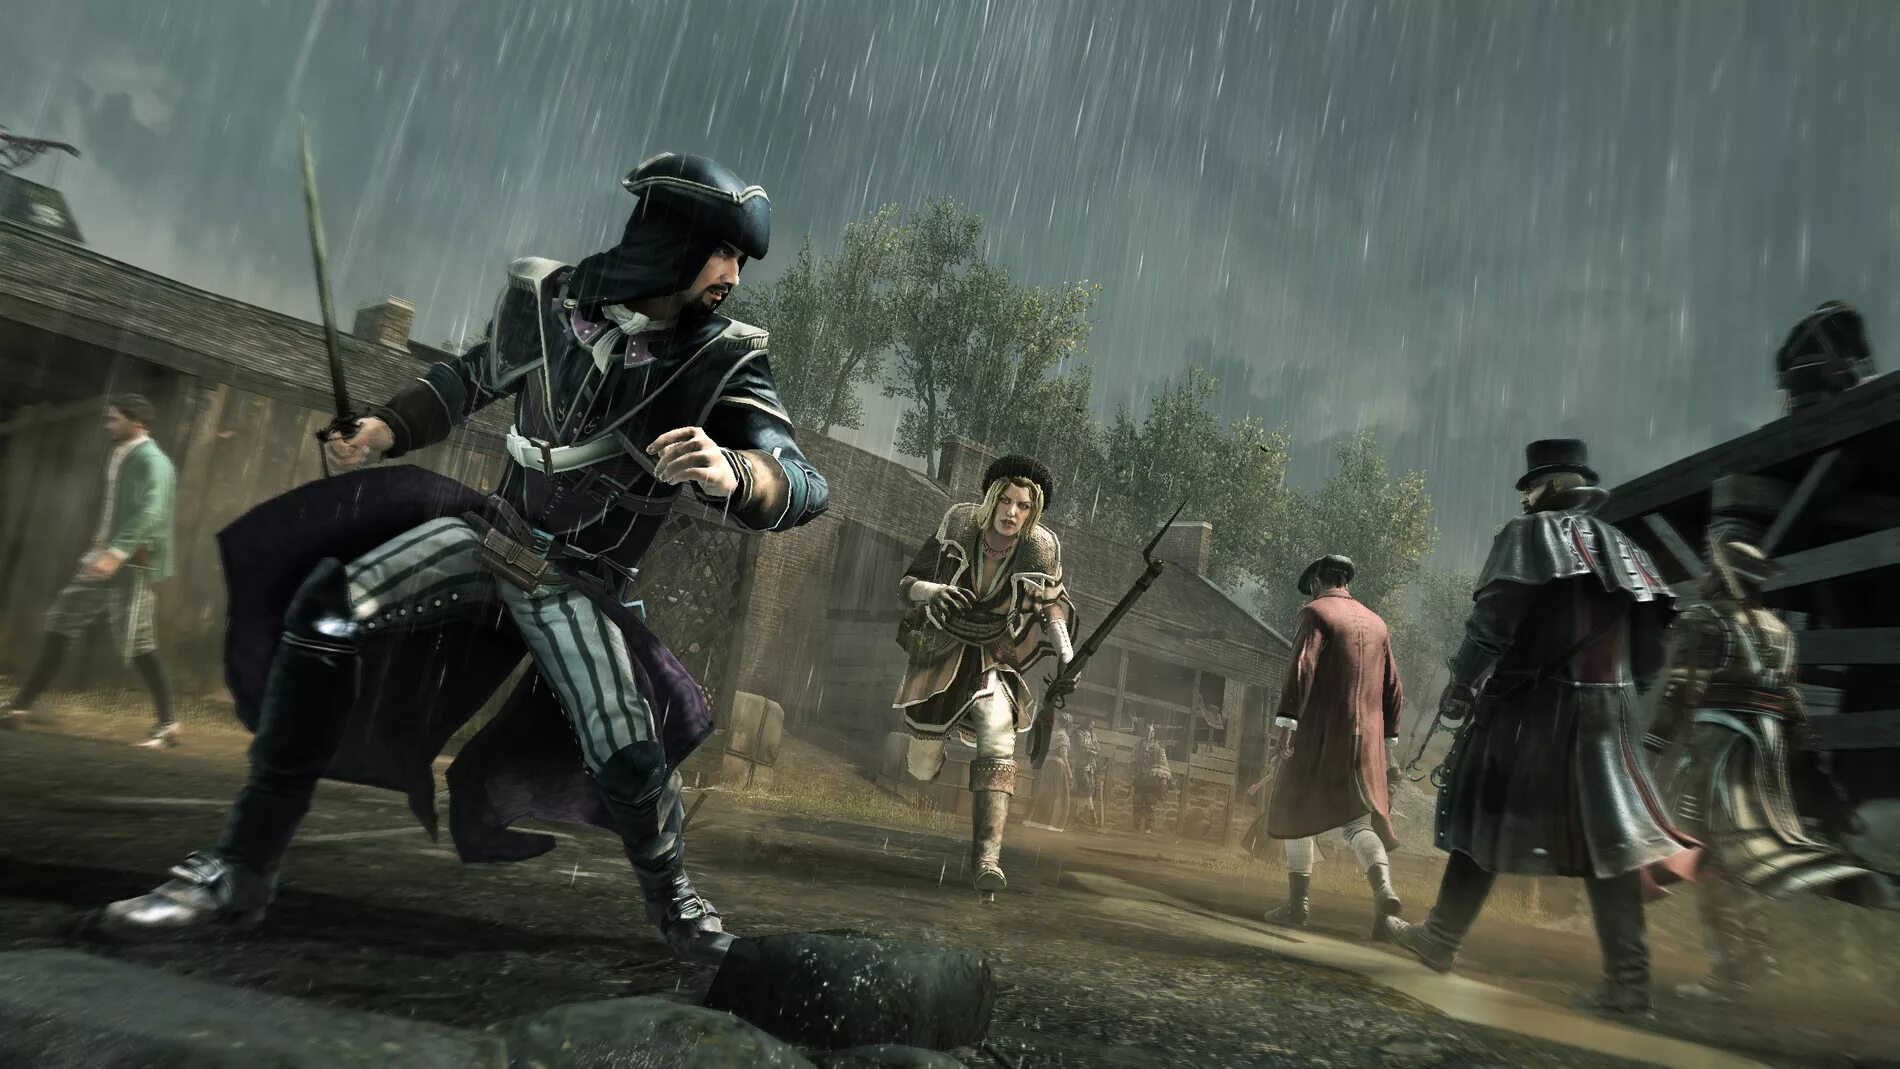 Assassin's Creed 3 PC. Assassins Creed 3 мультиплеер. Assassin's Creed 2012. Assassins Creed 3 Скриншоты. Assassin s creed iii